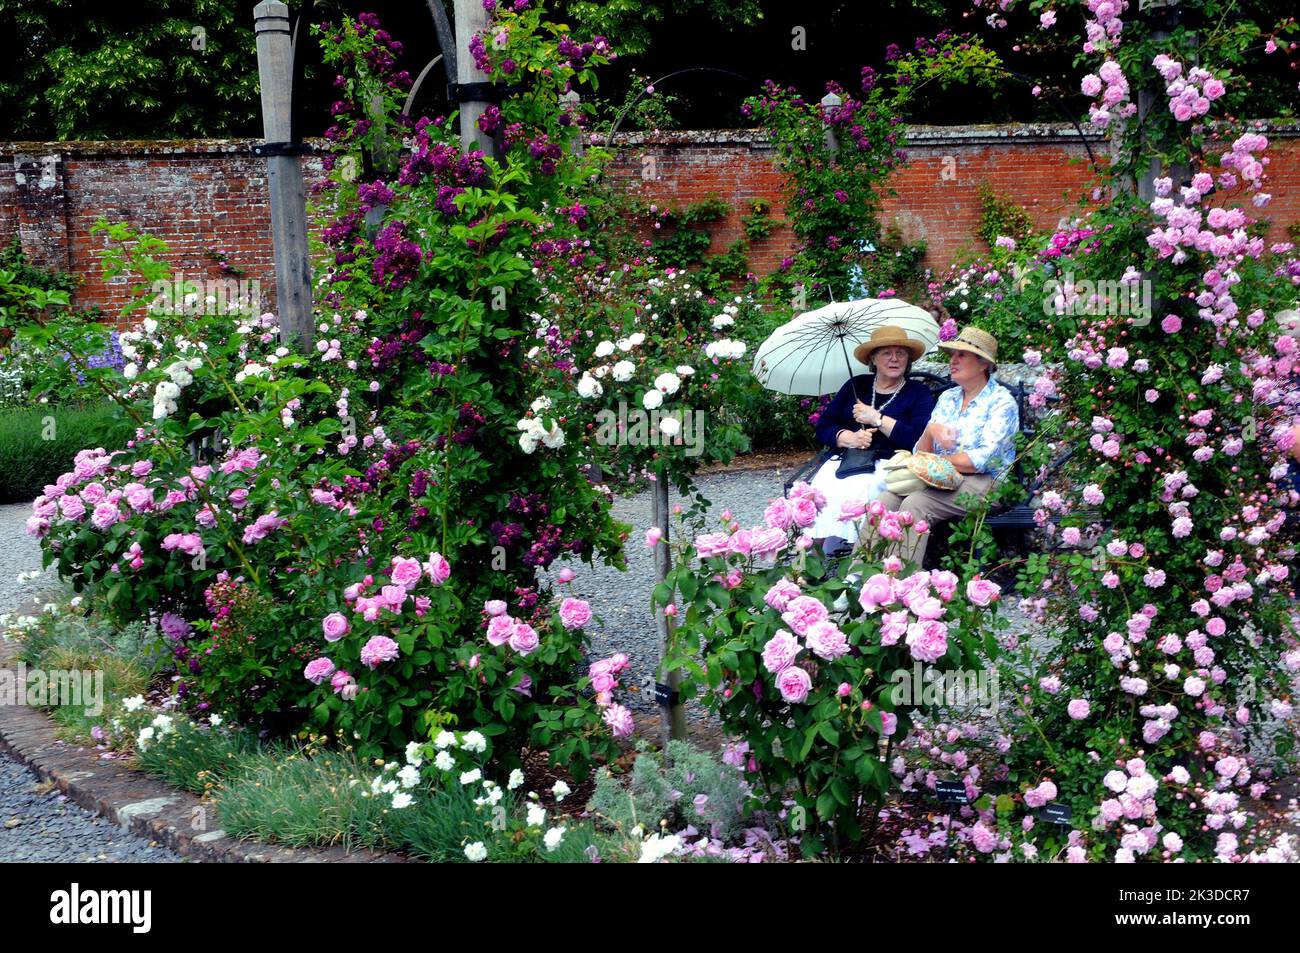 Its been a good year for the roses. The walled rose garden at the National Trust's Mottisfont Abbey near Romsey, |Hampshireis a blaze of colour during a bumper season ffor rose growers.. Visitors relax in the shade under a parasol in the pagoda.  Pic Mike Walker, Mike Walker Pictures,2015 Stock Photo